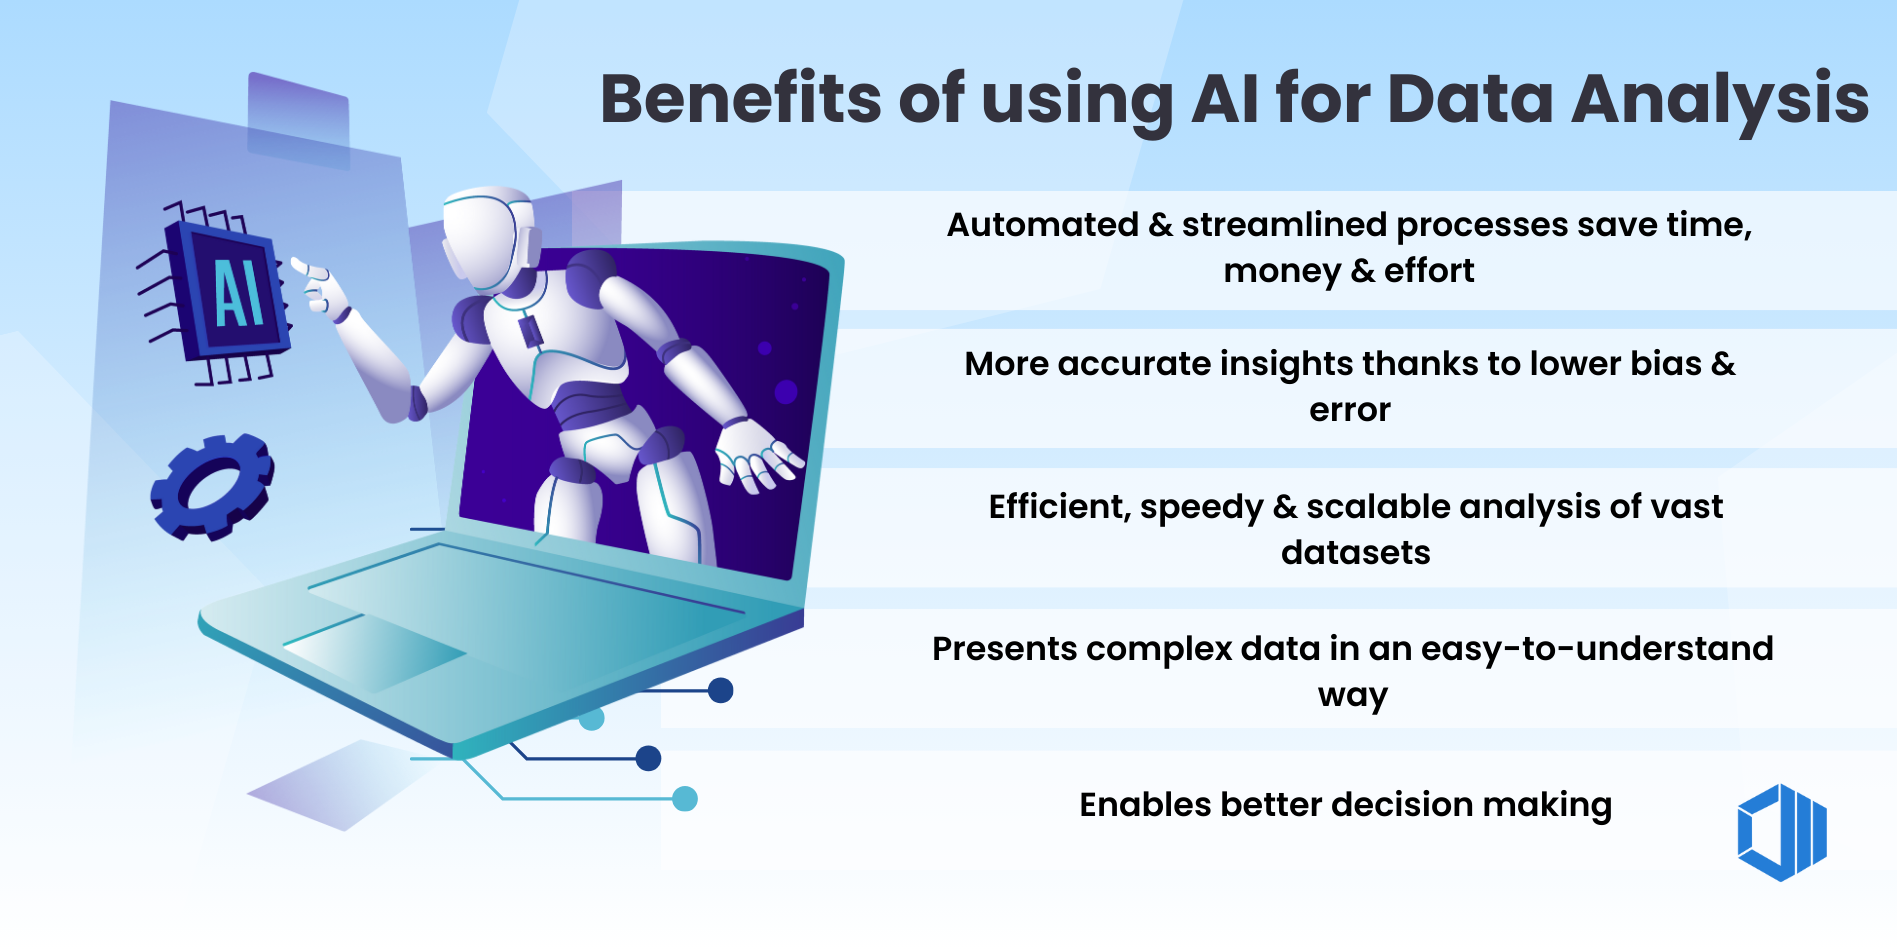 Infographic highlighting benefits of AI in data analysis: faster insights, increased accuracy, democratized data, cost savings, enhanced scalability, and better decision-making.